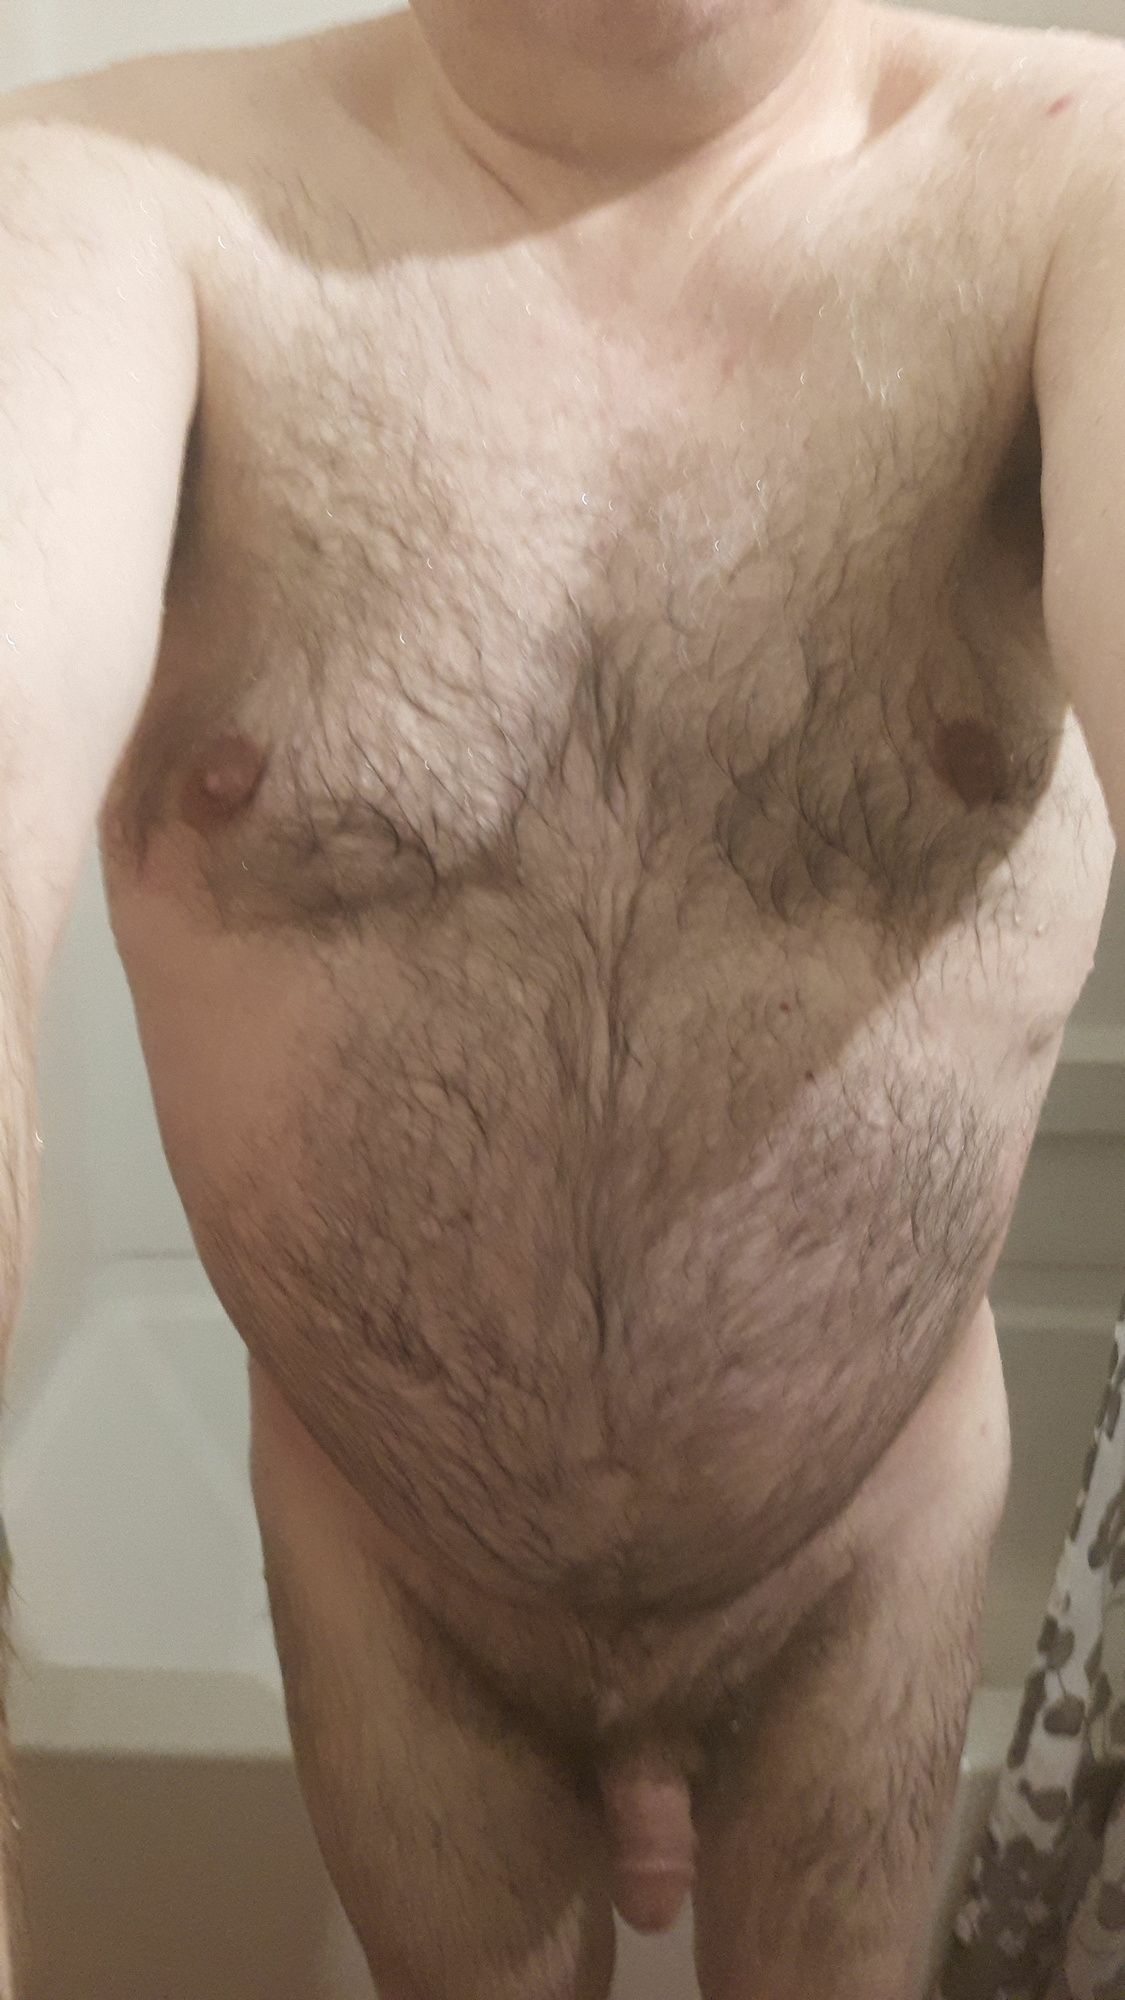 My hairy dad bod #4